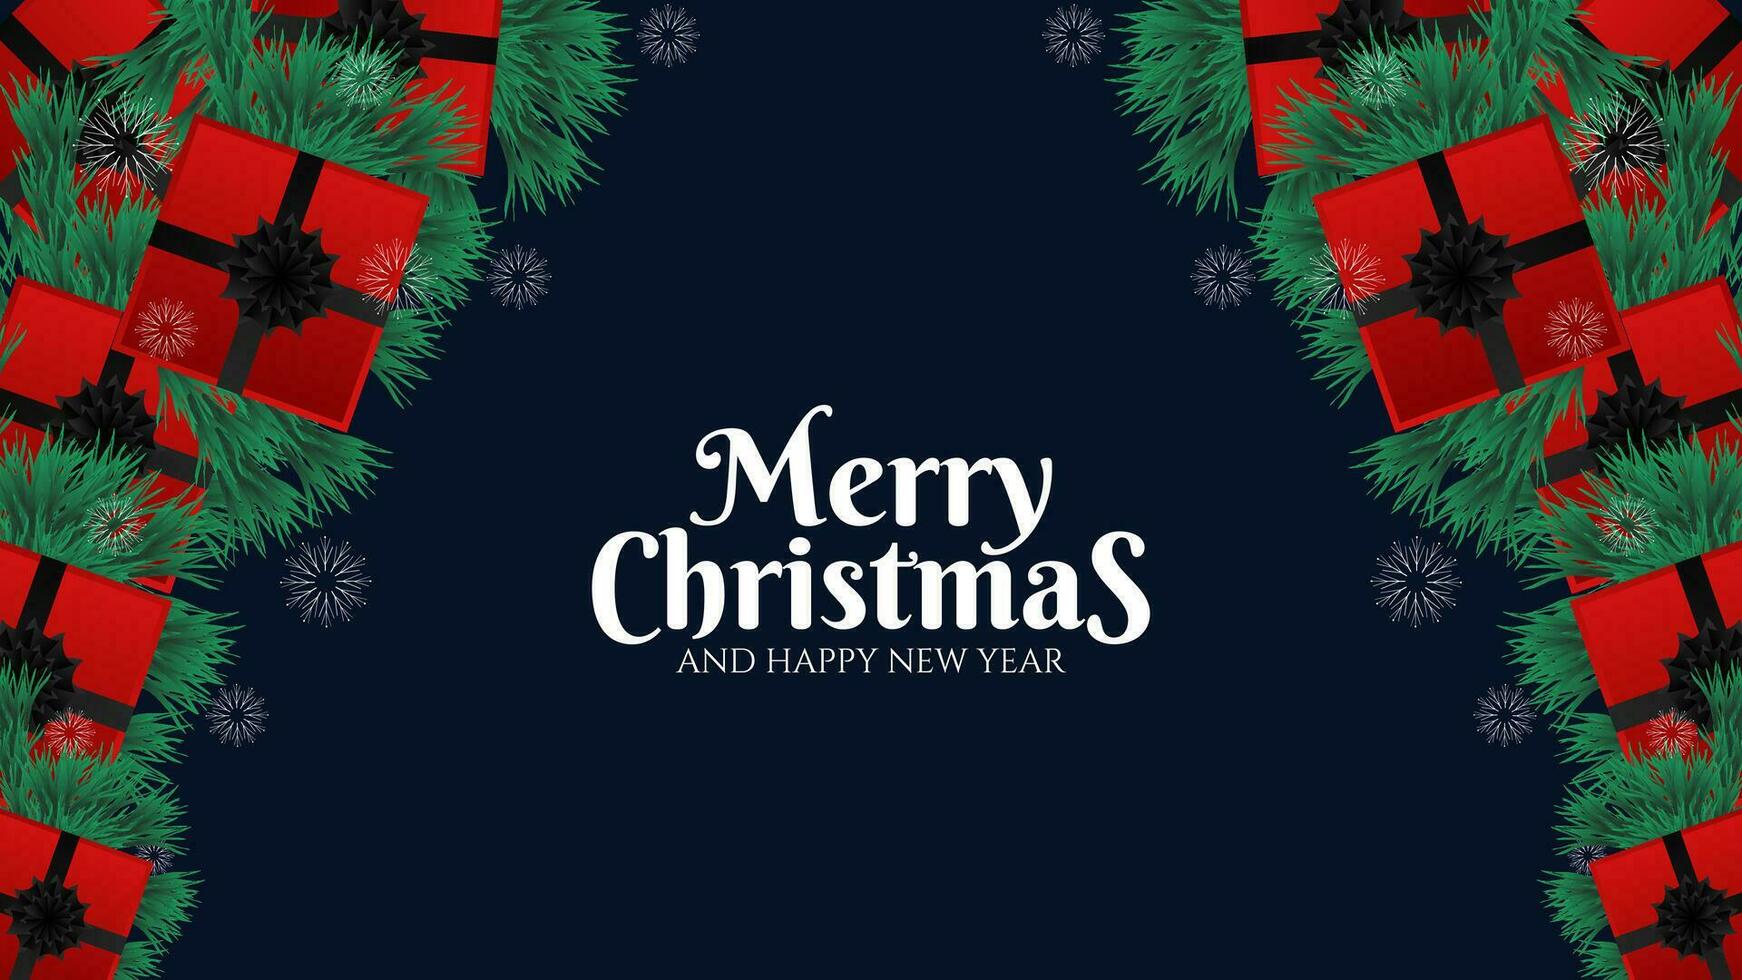 Merry christmas and happy new year banner with garlands, snowflakes and gift boxes on dark blue background. Vector illustration